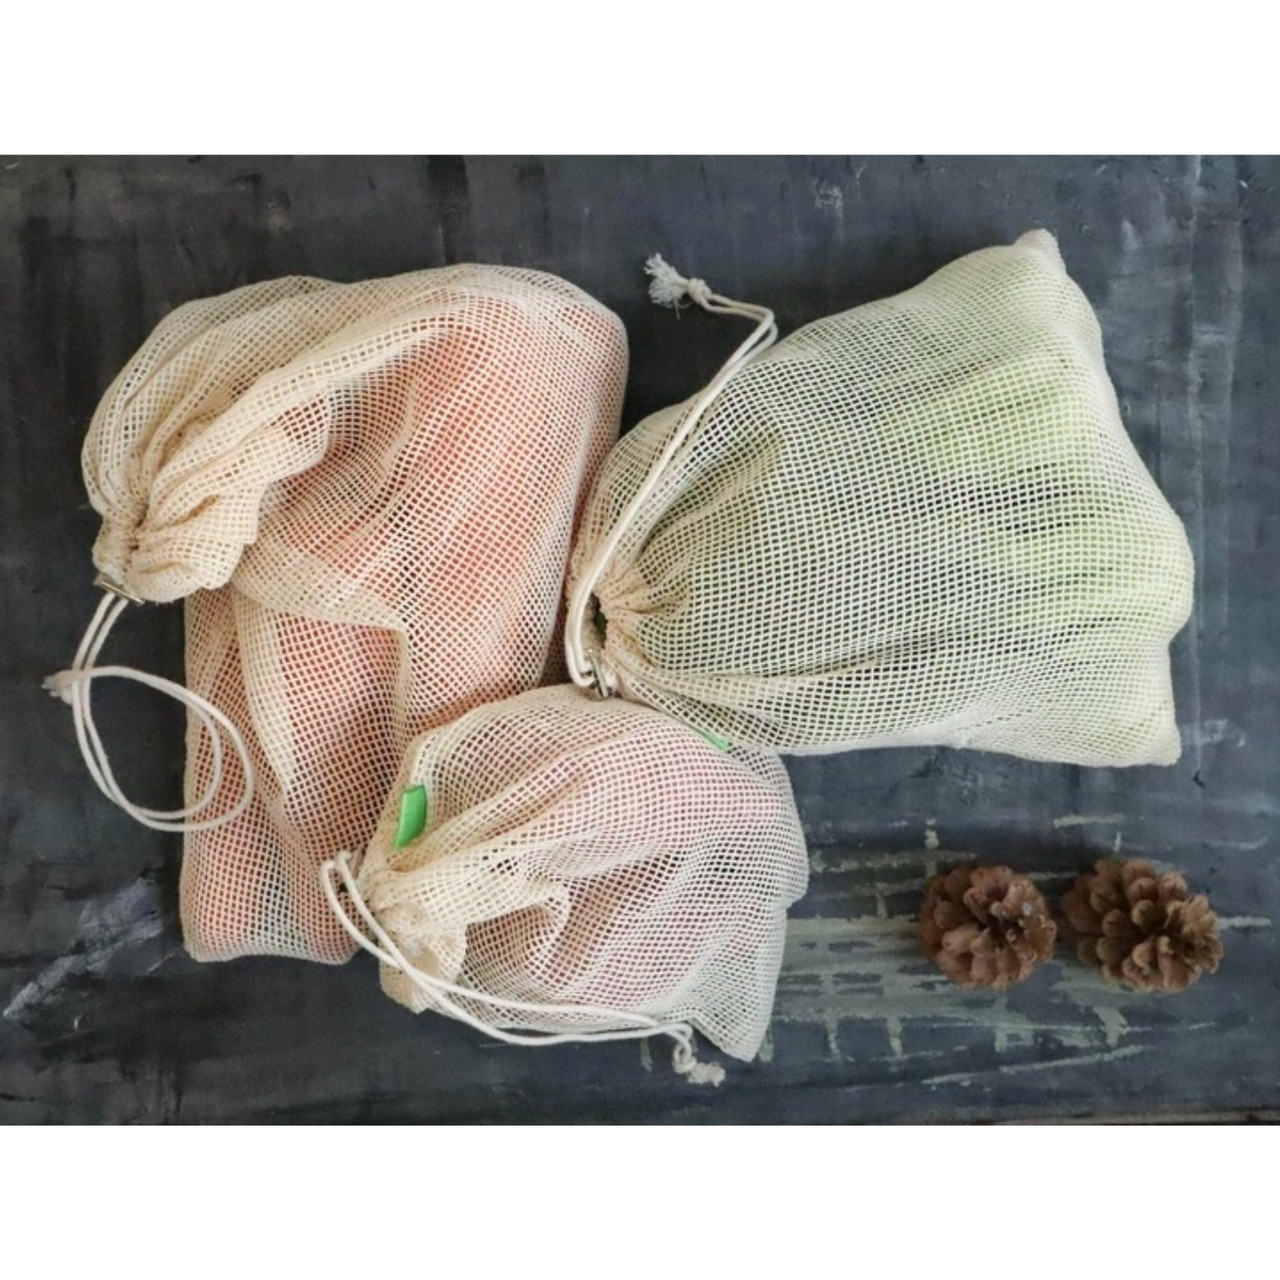 SRP Craft 100% Organic Cotton mesh Fabric is Lightweight, Reusable Produce  Storage Bags, eco-Friendly and Makes Awesome Grocery Bag for Veggies and